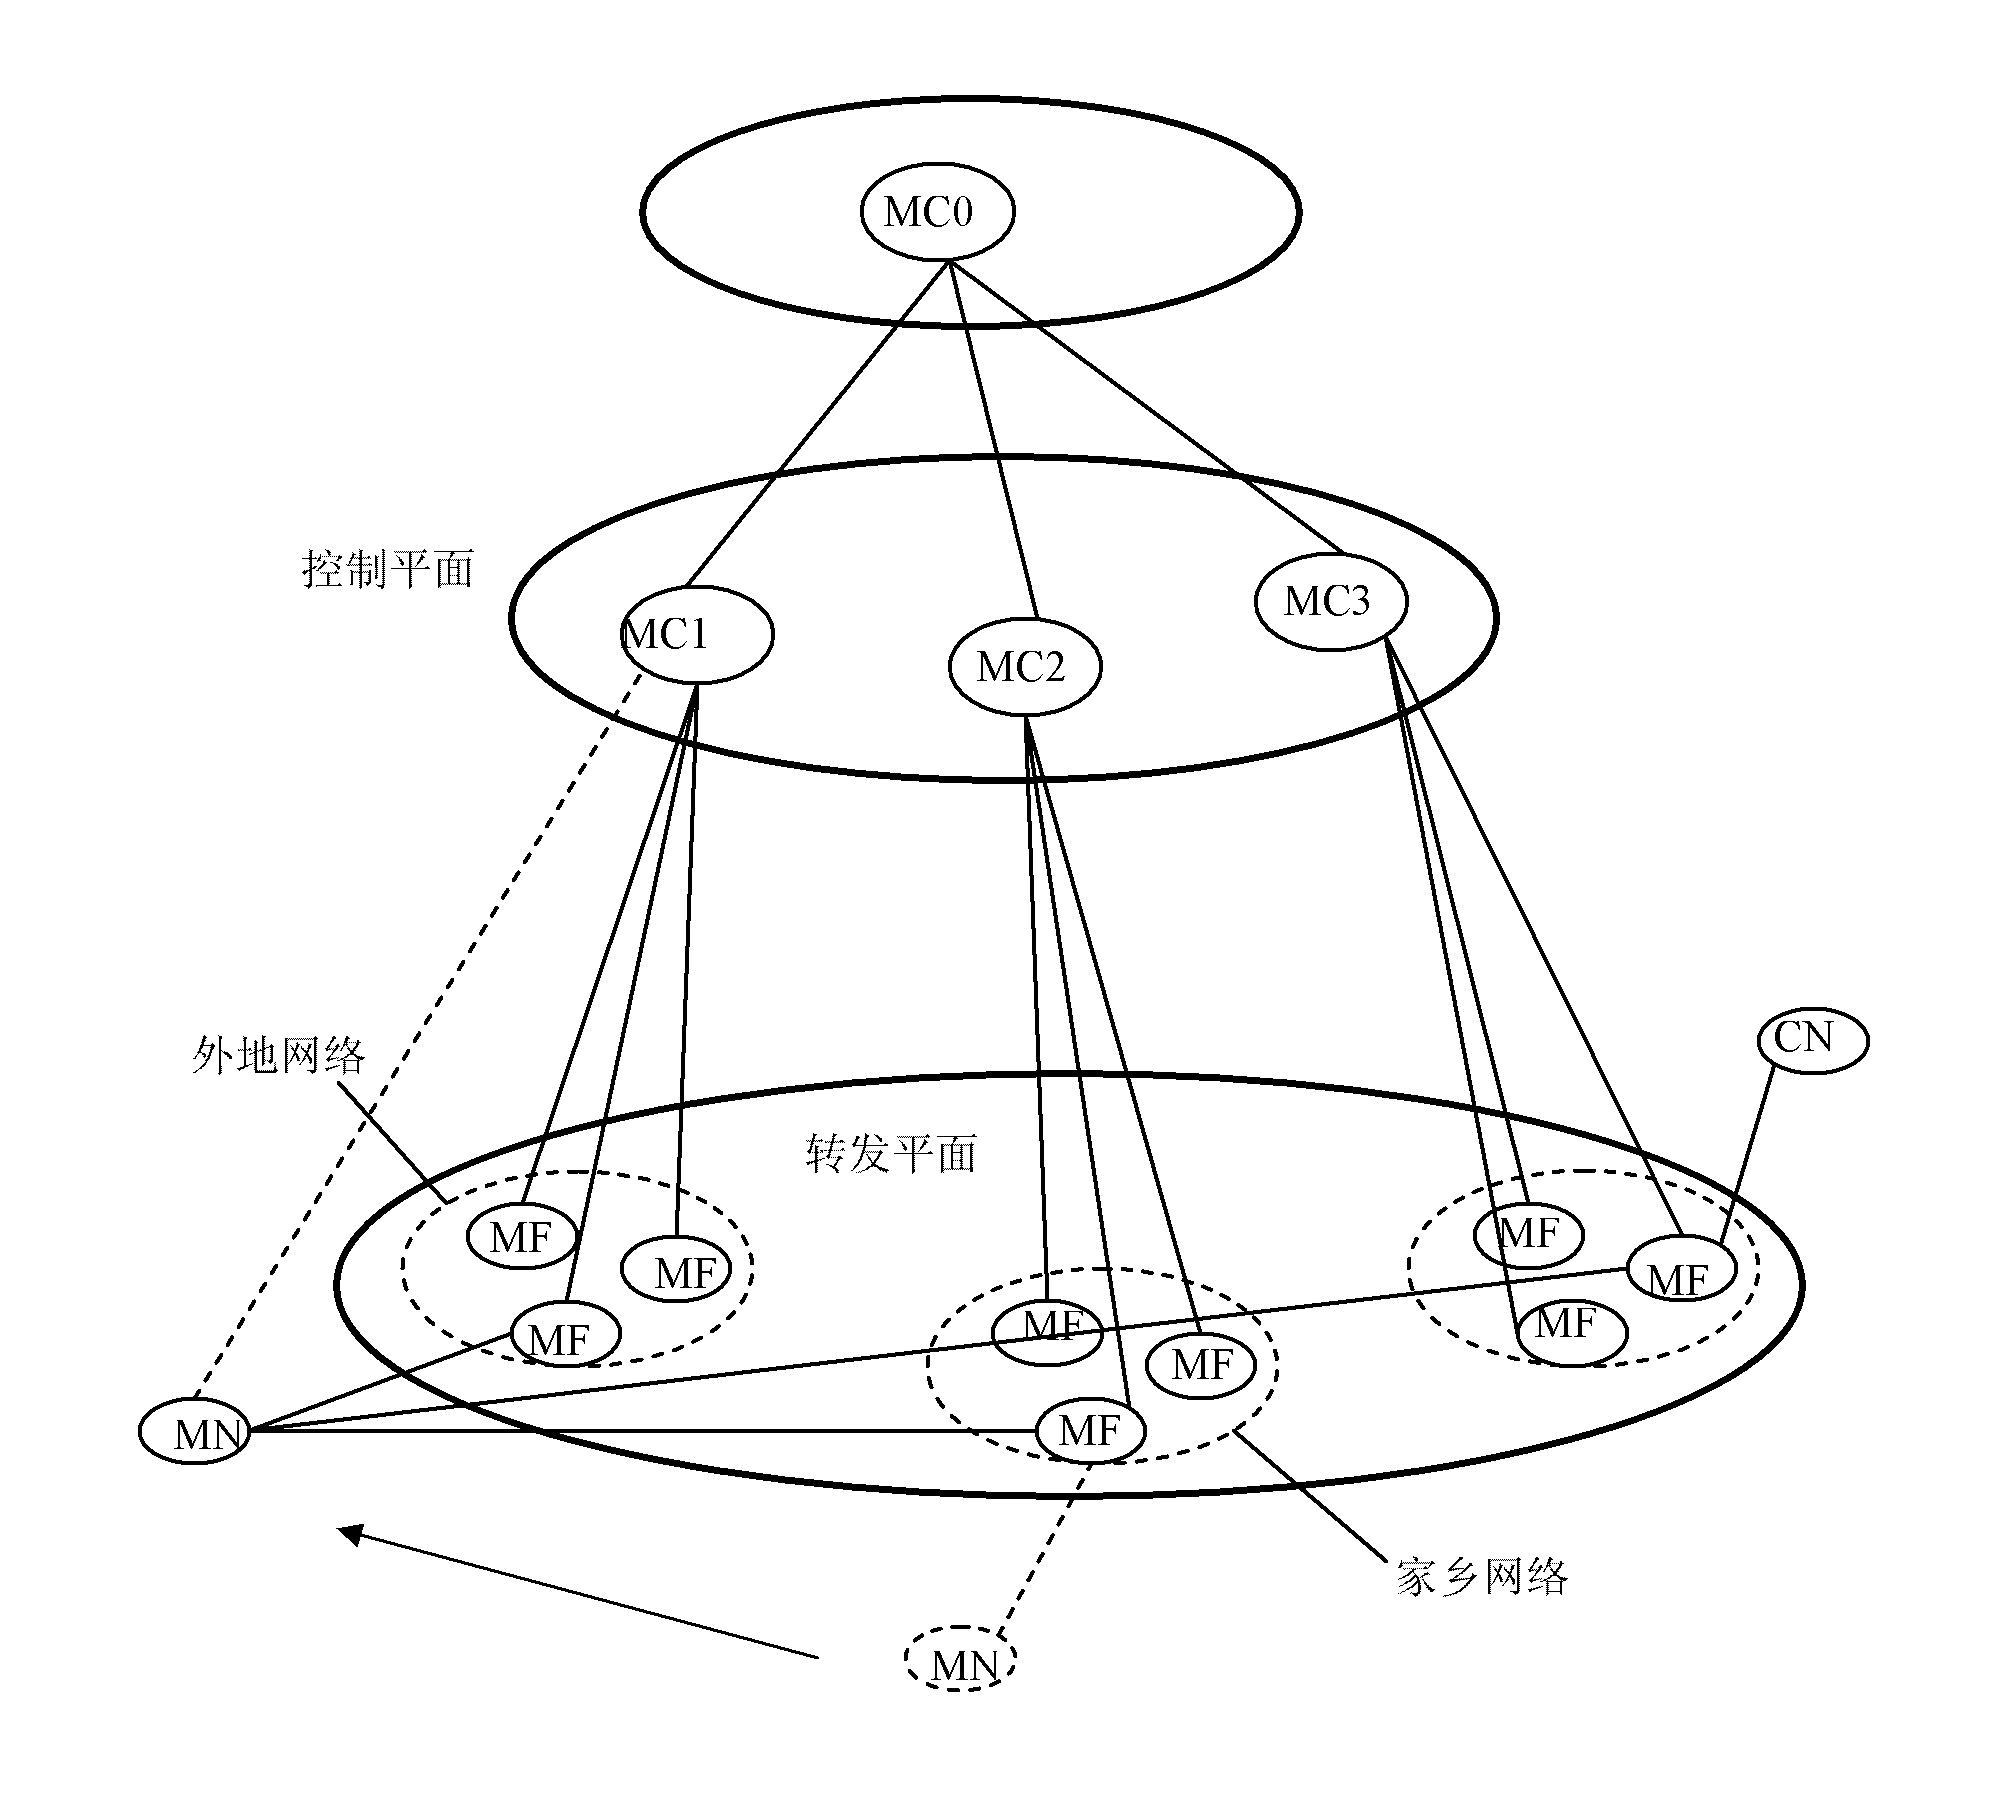 Method and network system for realizing mobile internet protocol (IP) management